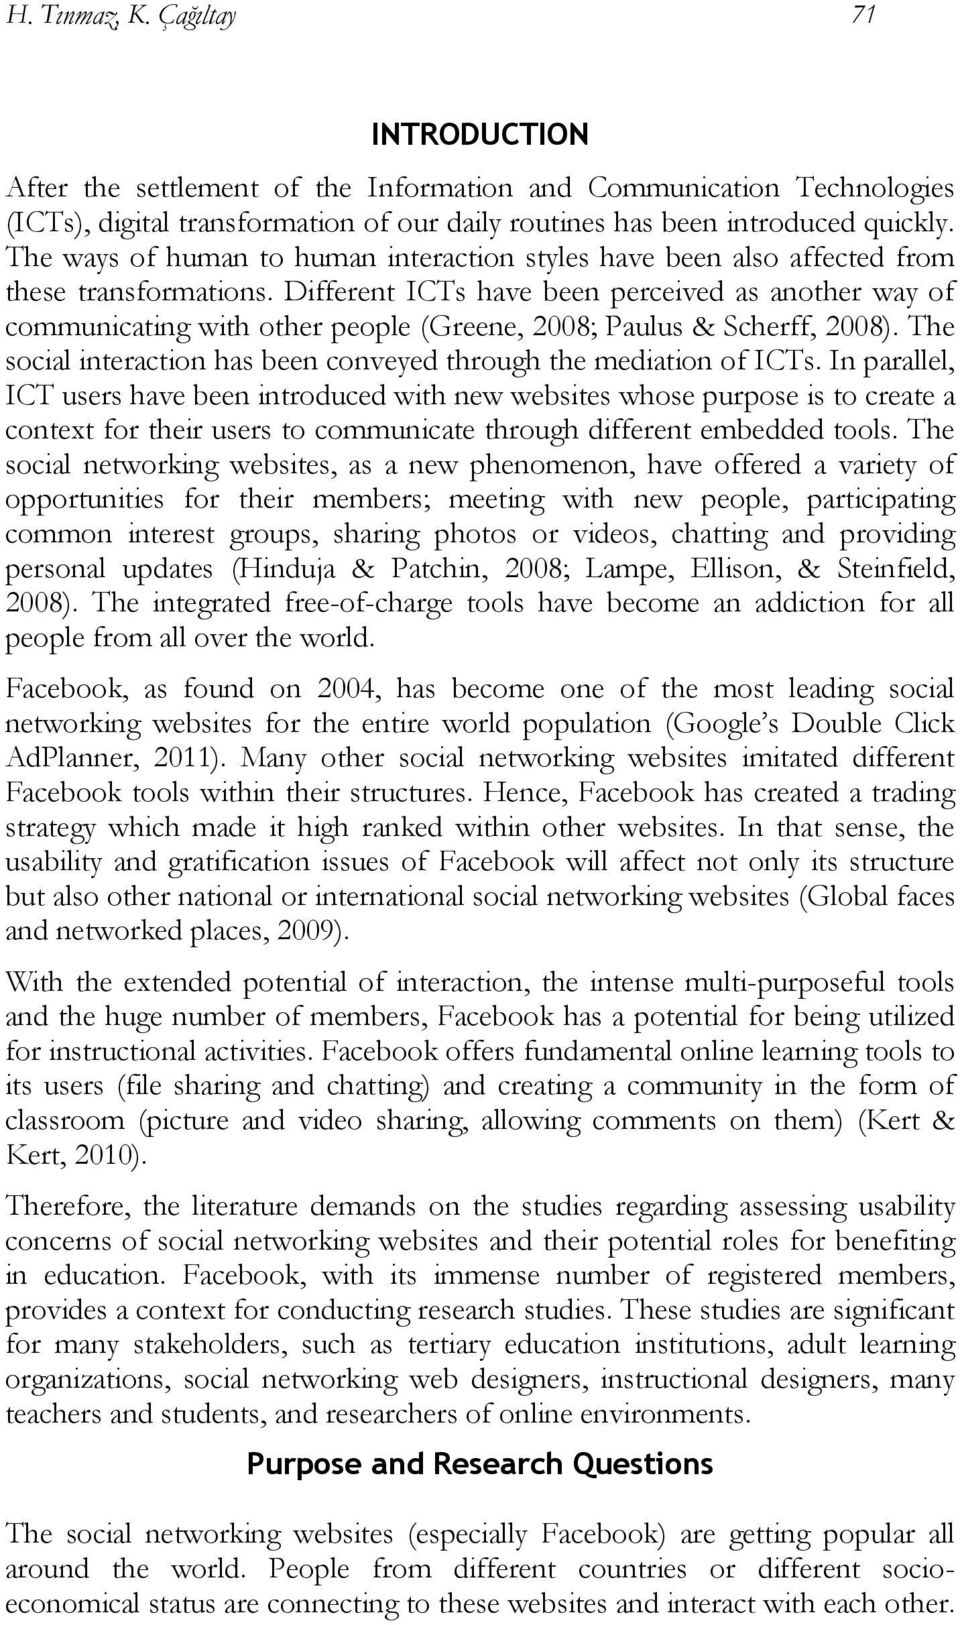 Different ICTs have been perceived as another way of communicating with other people (Greene, 2008; Paulus & Scherff, 2008). The social interaction has been conveyed through the mediation of ICTs.